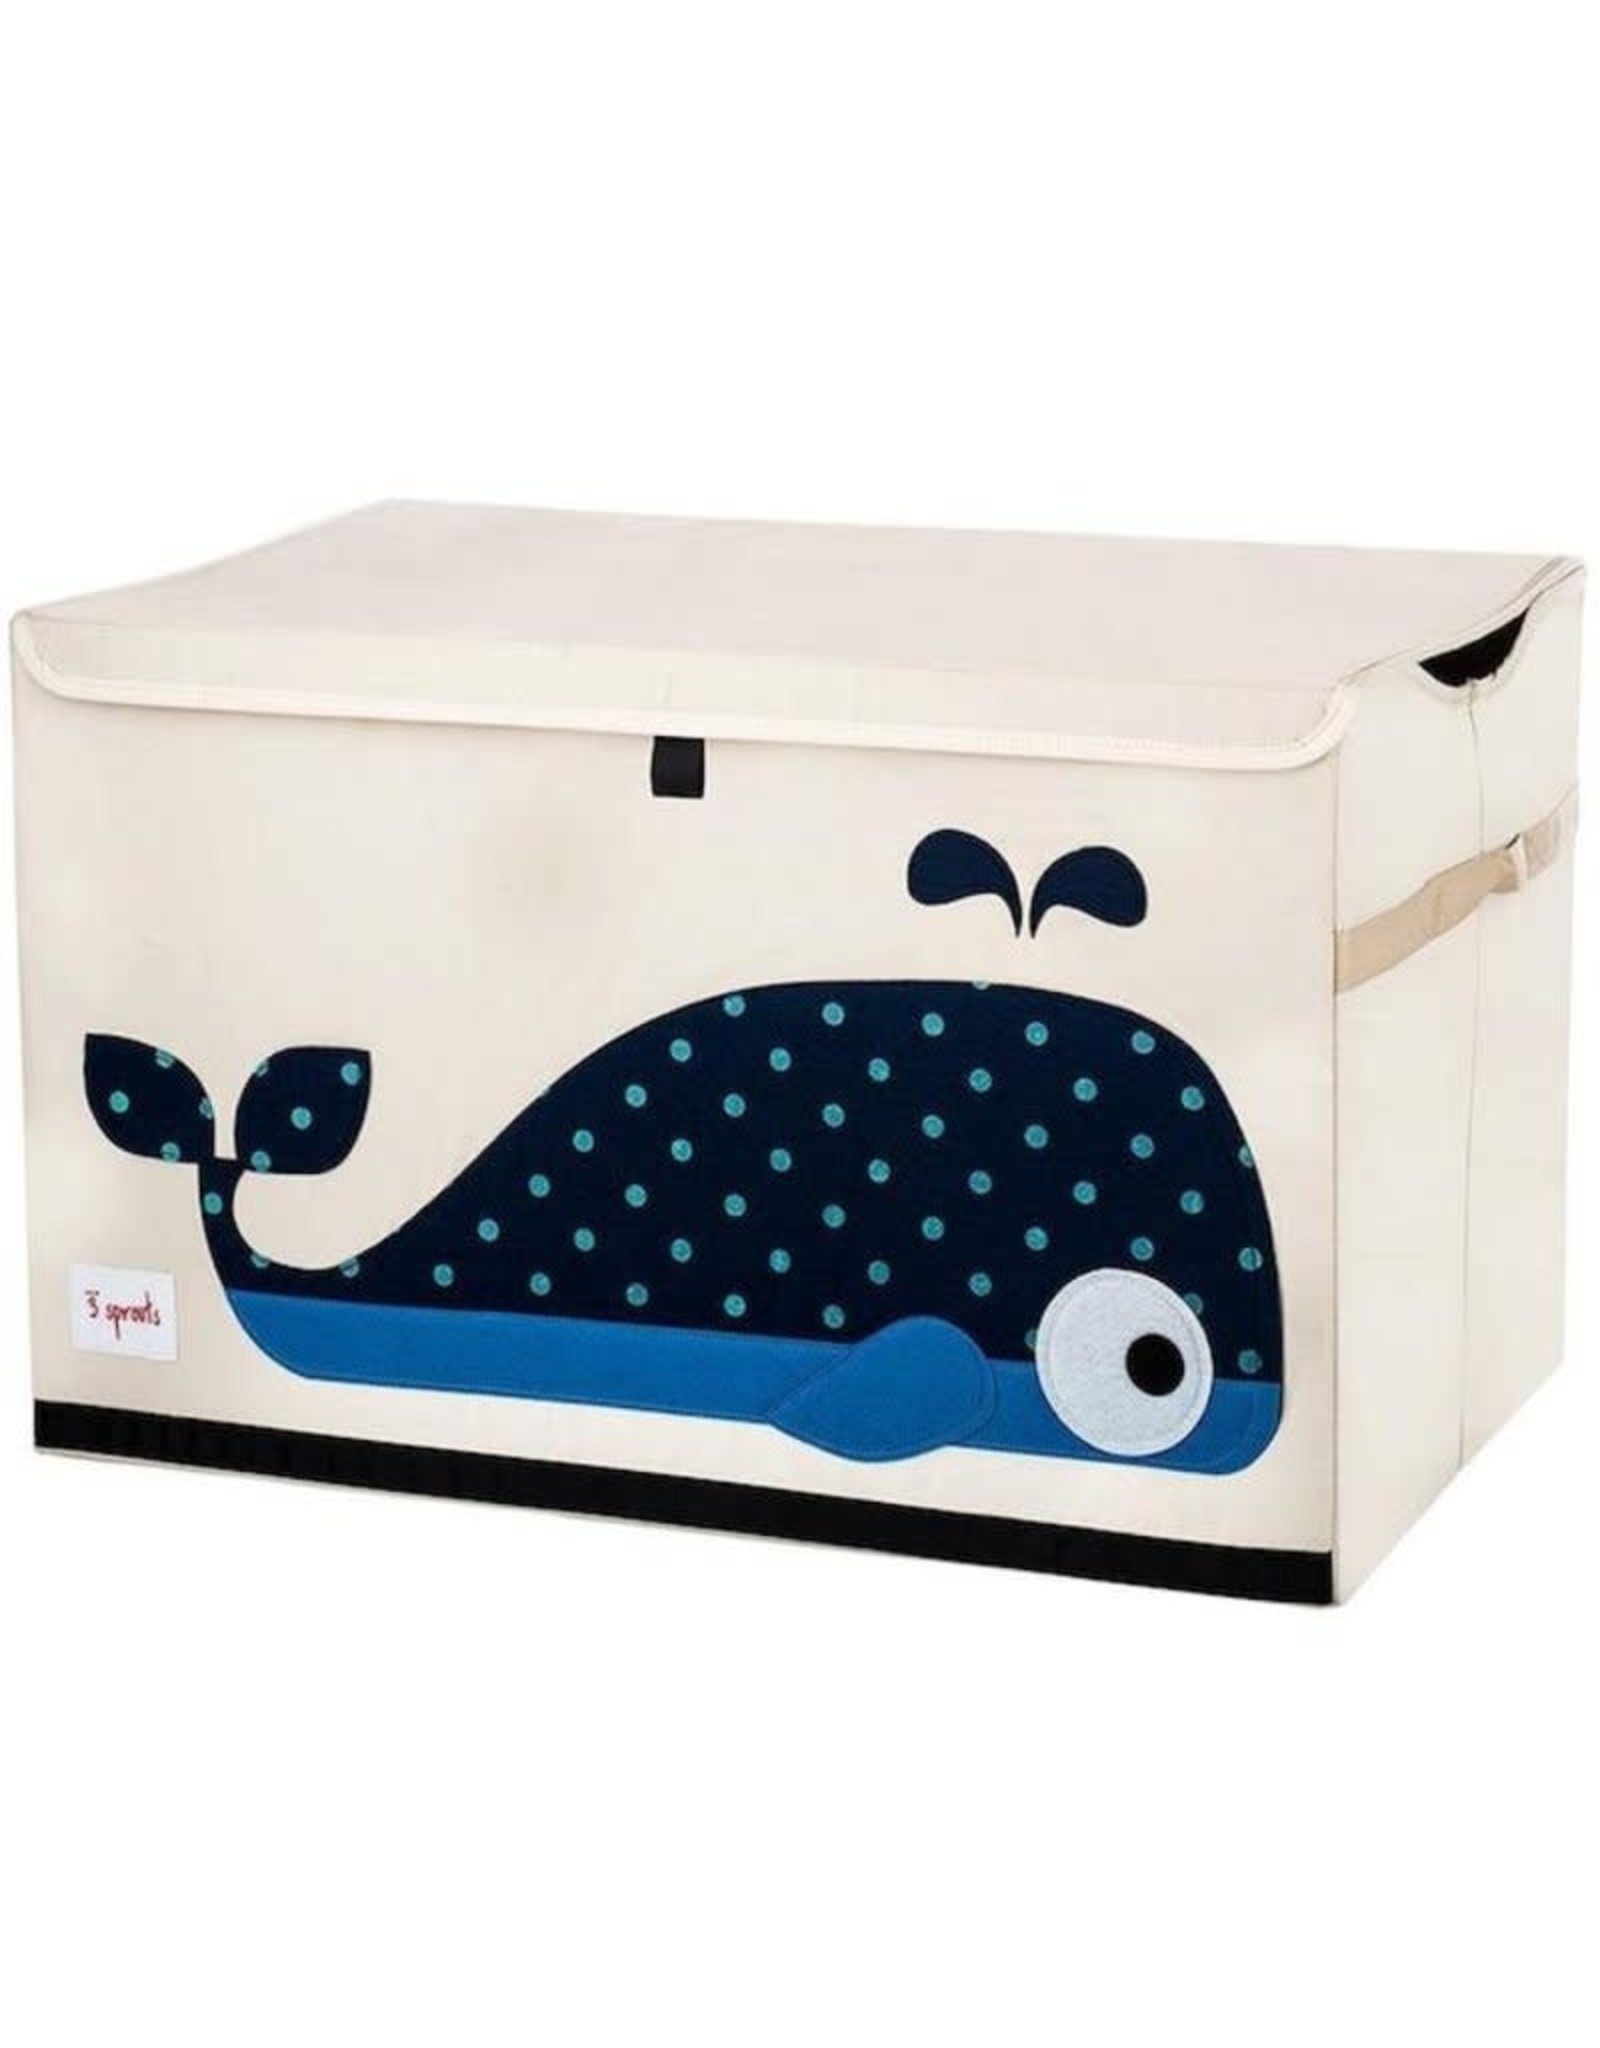 3 Sprouts Toy Chest Blue Whale